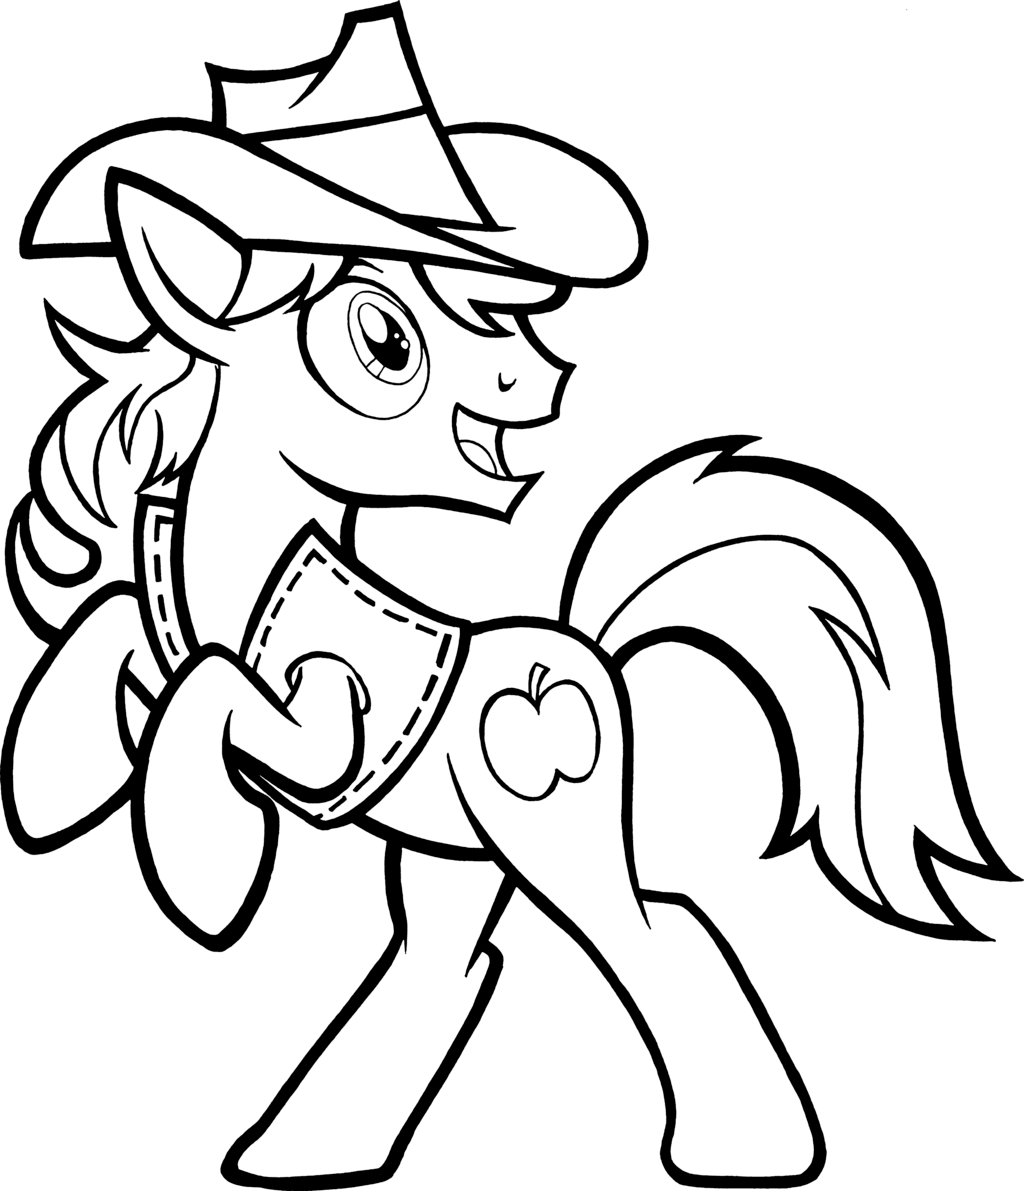 colouring pages pony december 2012 team colors colouring pages pony 